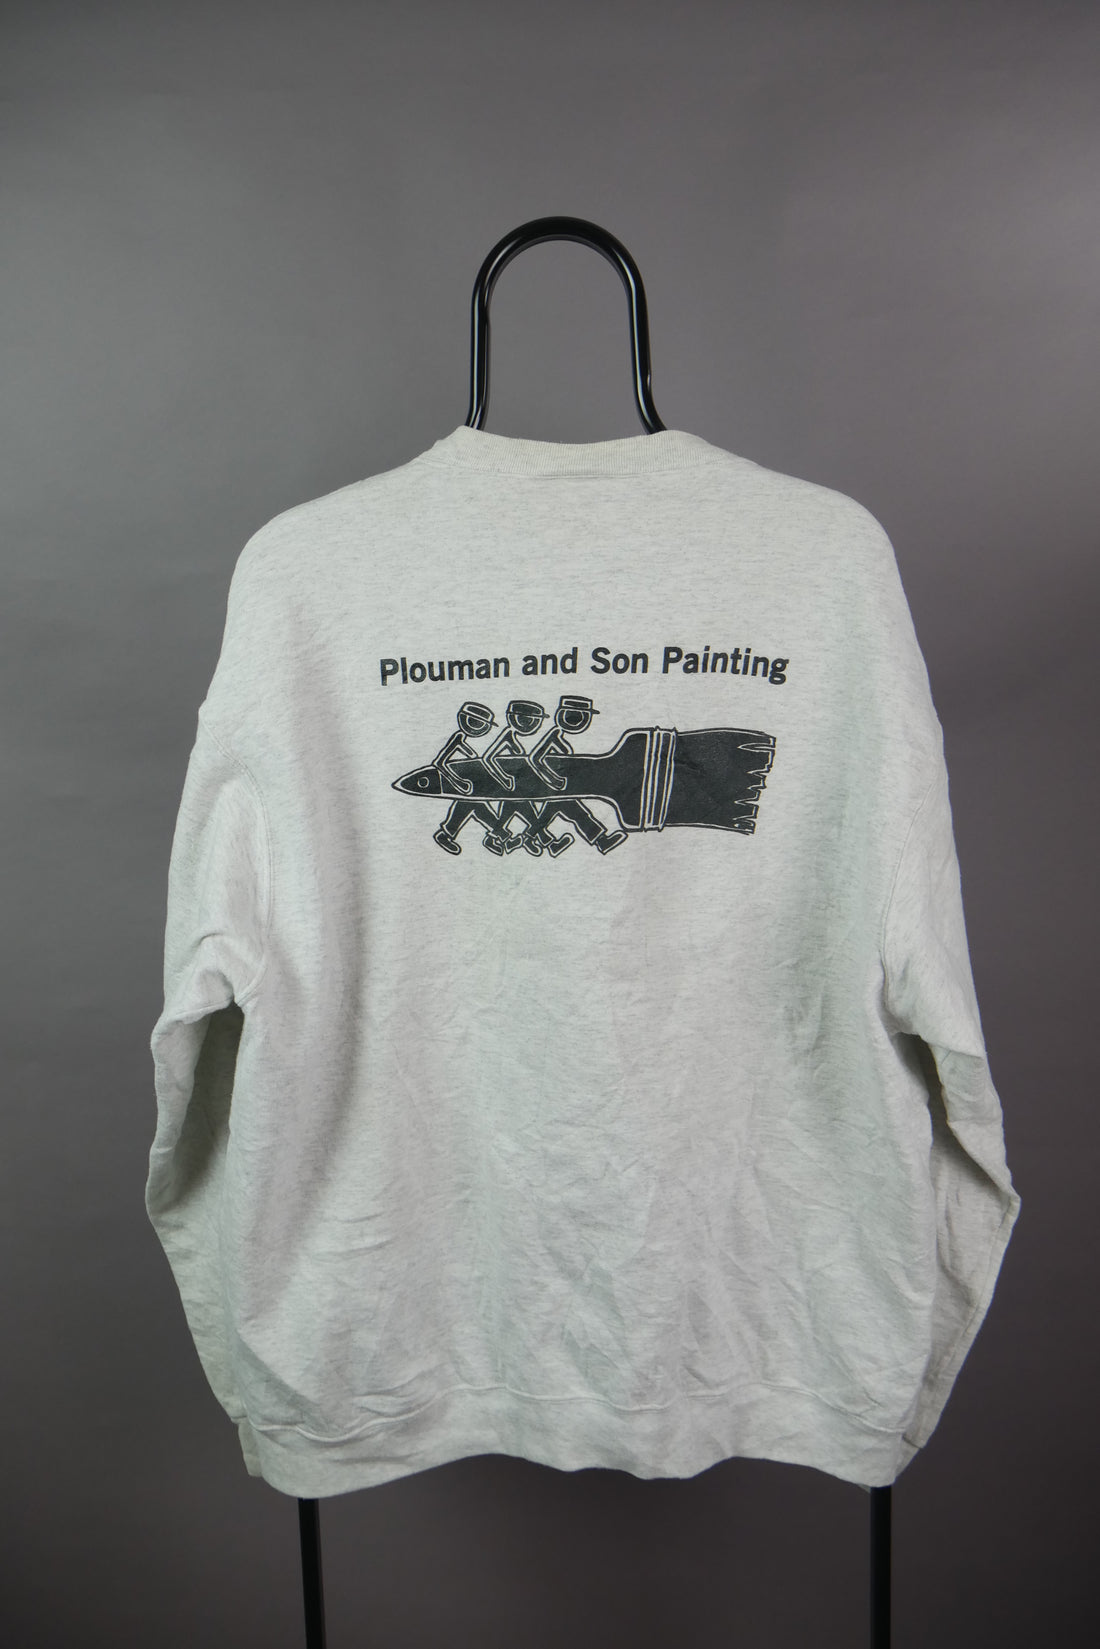 The Plouman and Son Painting Graphic Sweatshirt (M)